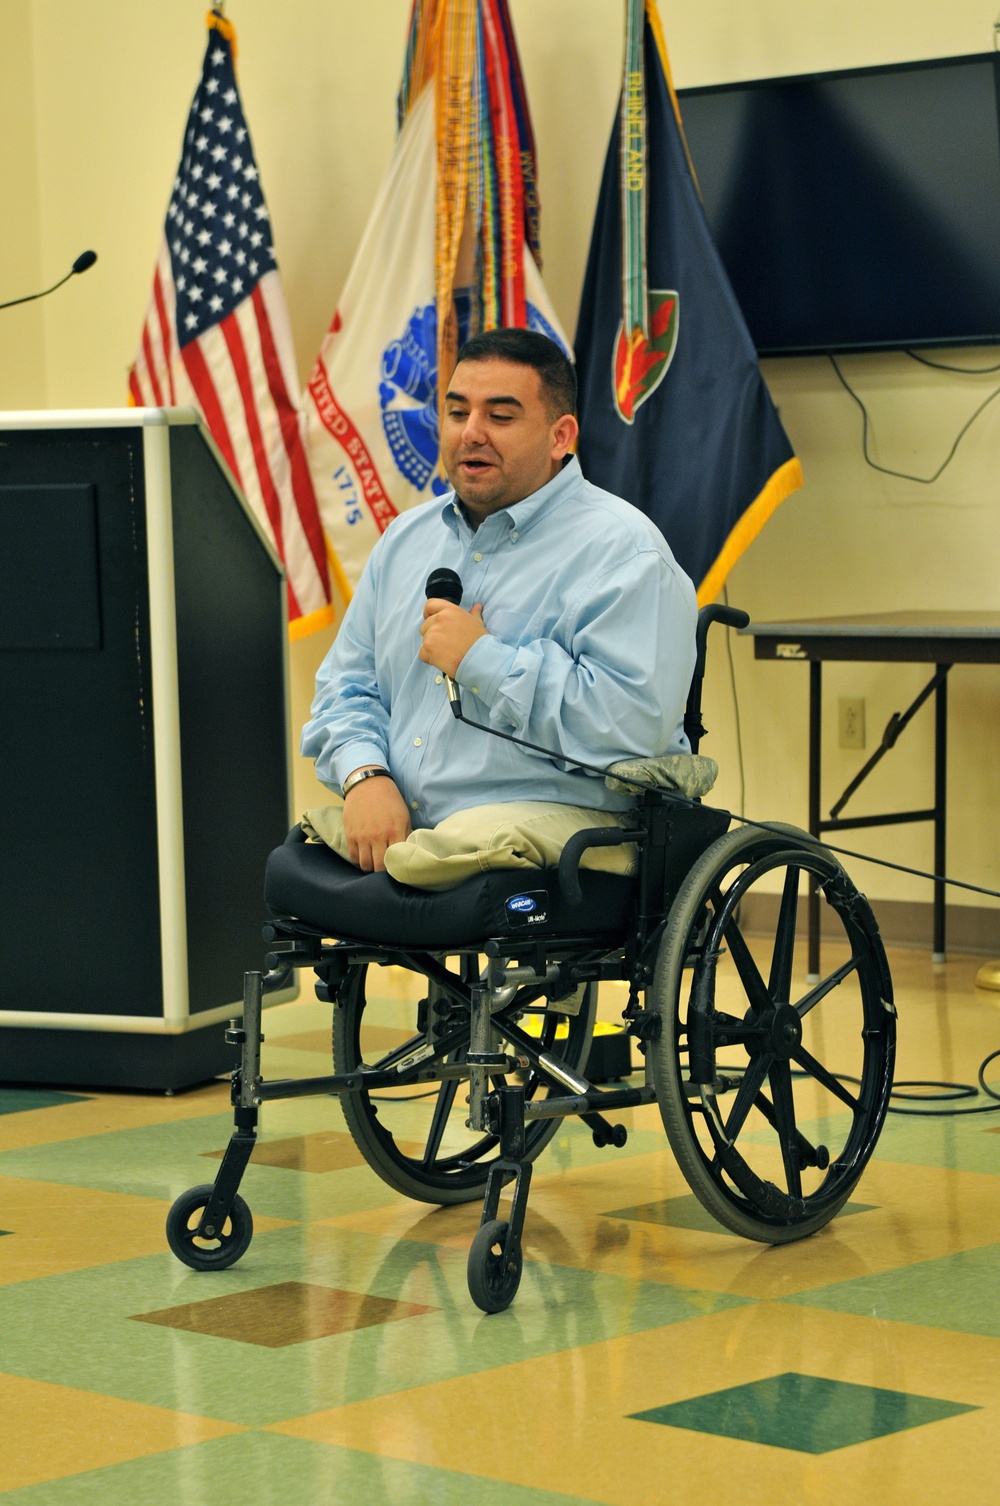 Wounded warrior embraces Latino heritage and culture